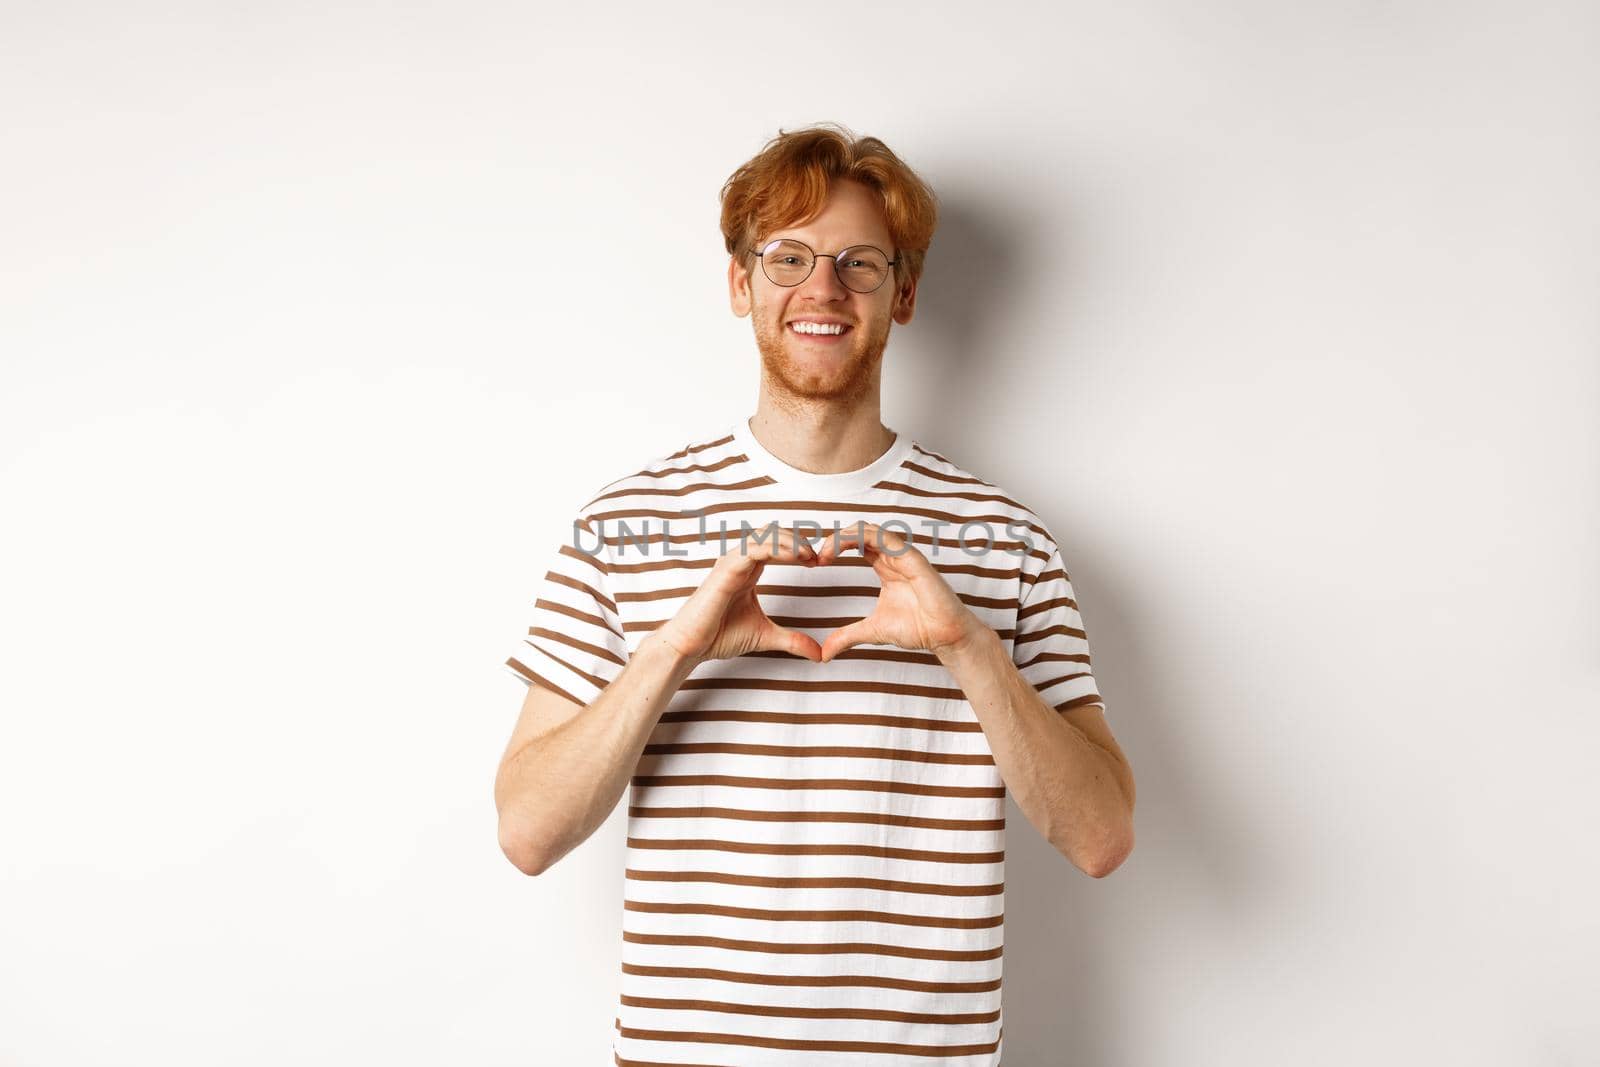 Valentines day. Happy boyfriend with red hair, smiling and showing heart gesture, I love you, standing over white background.